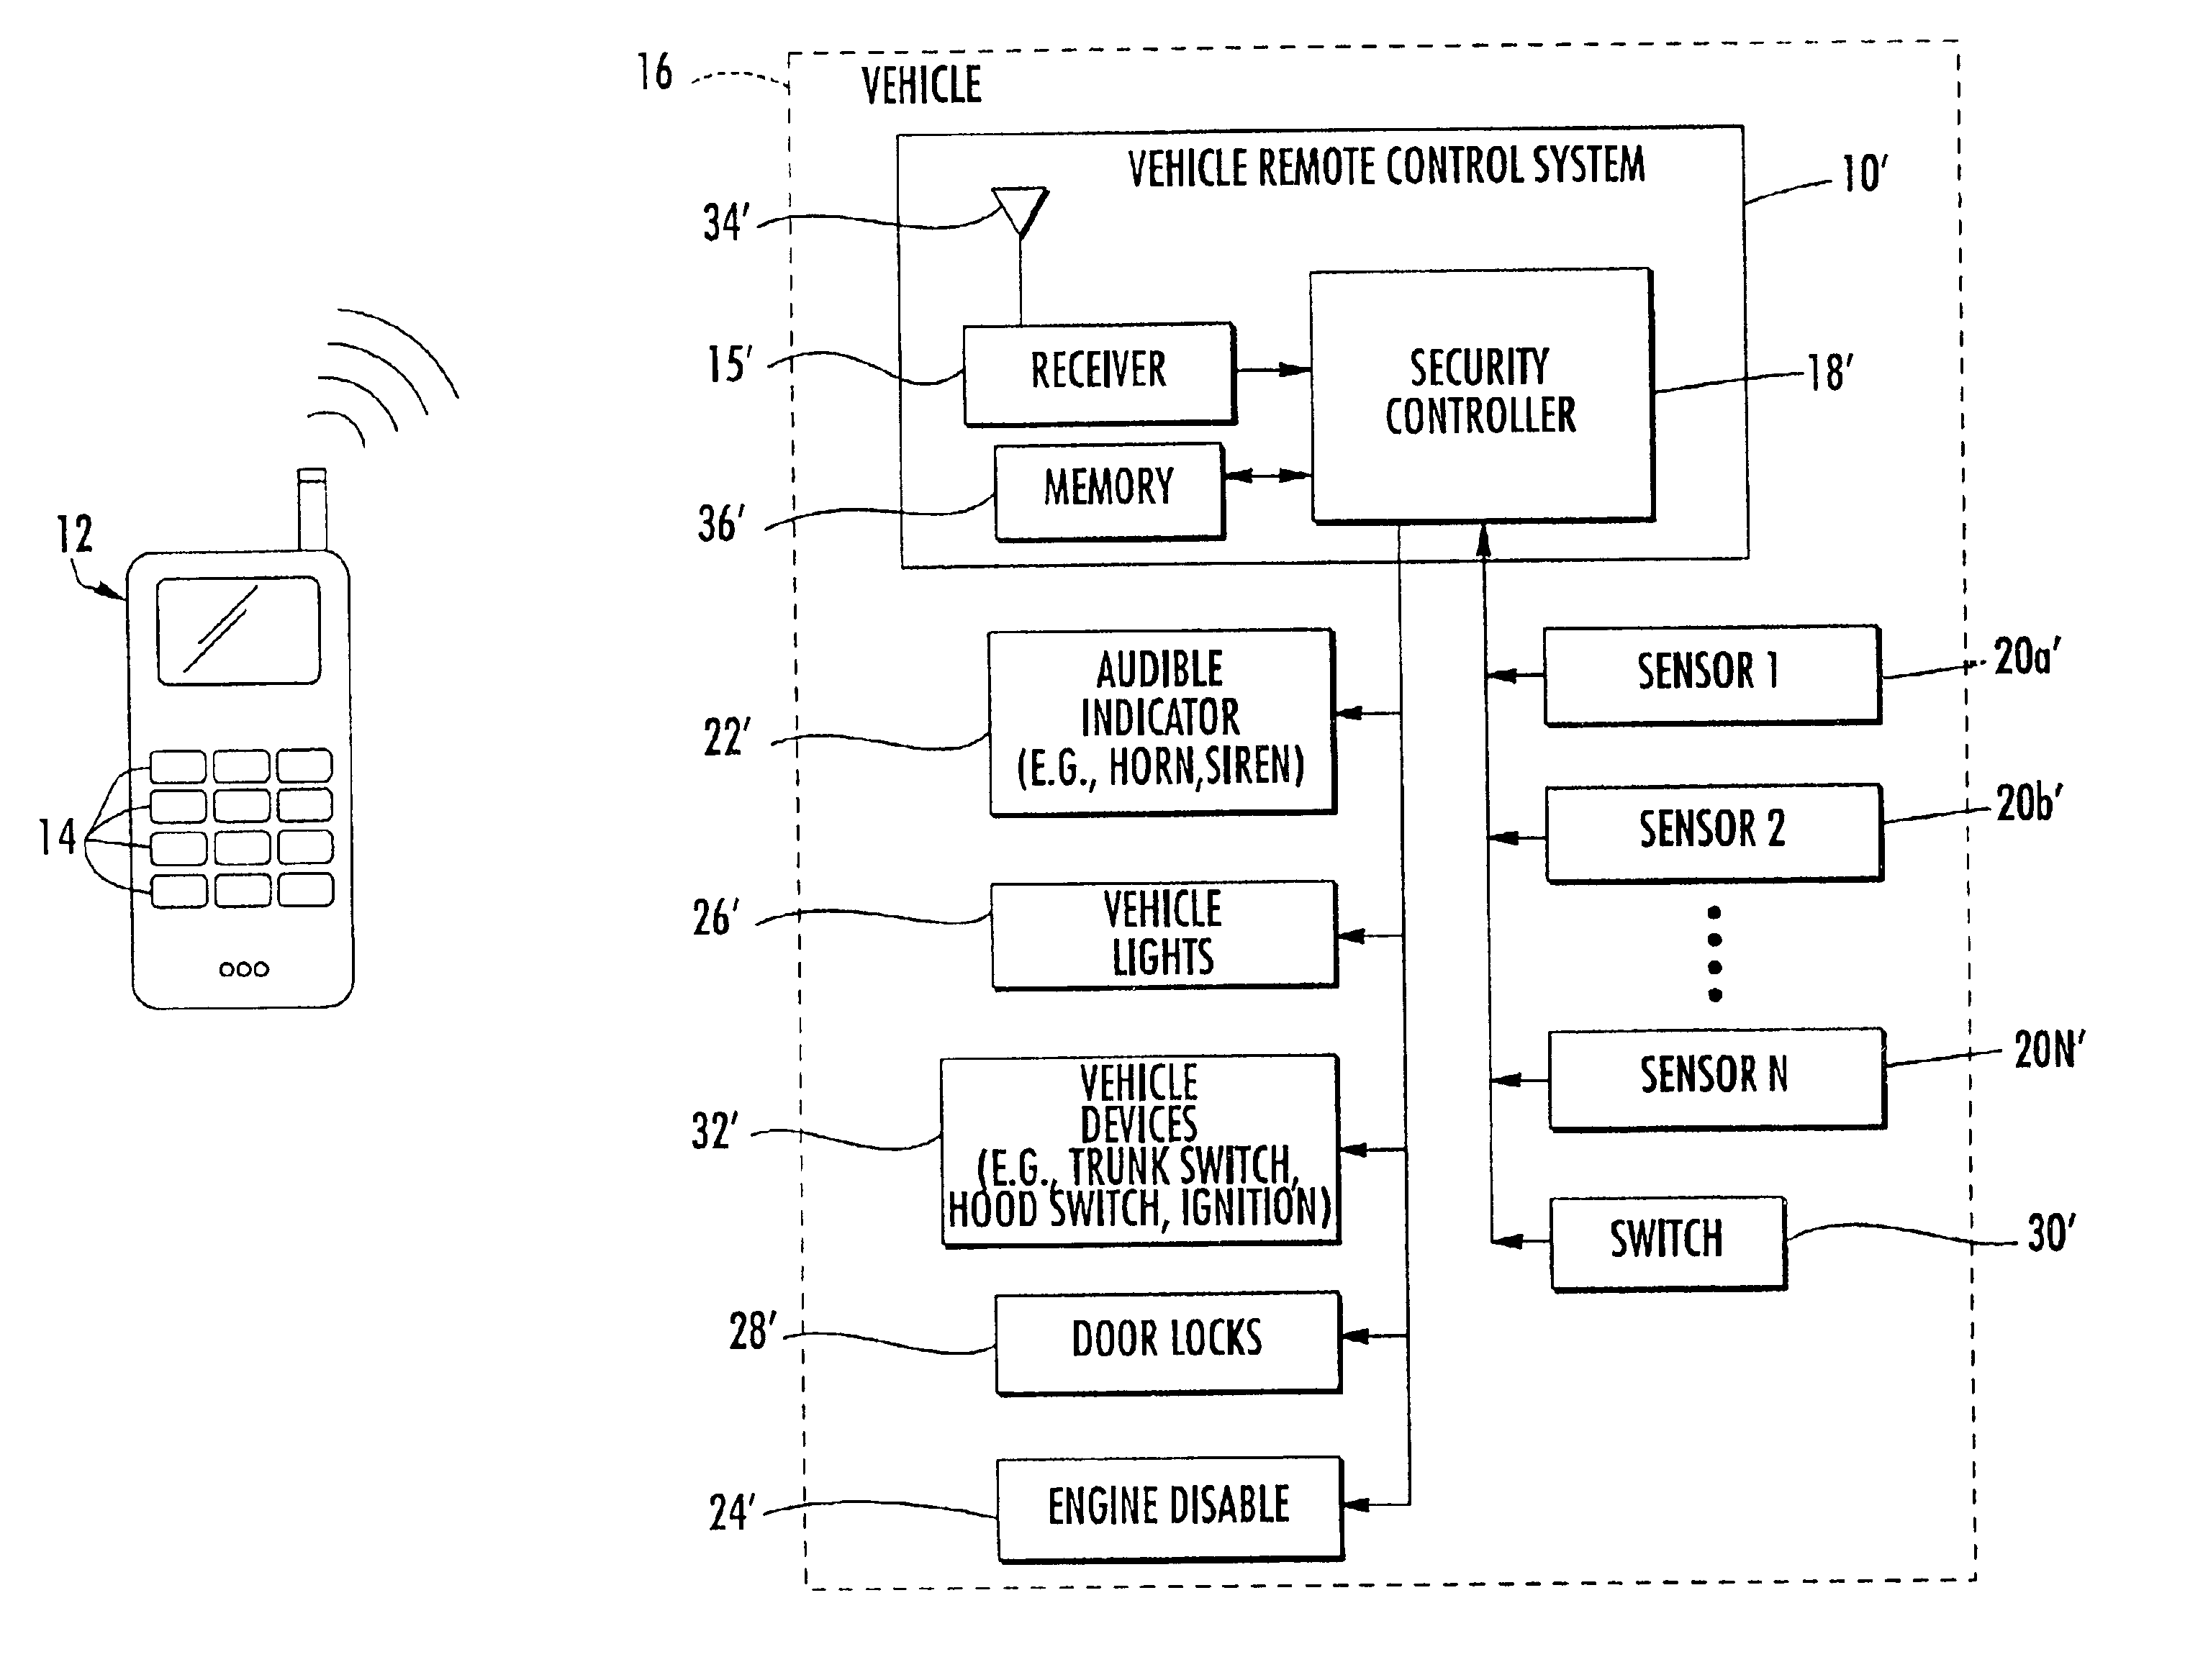 Remote control system using a cellular telephone and associated methods